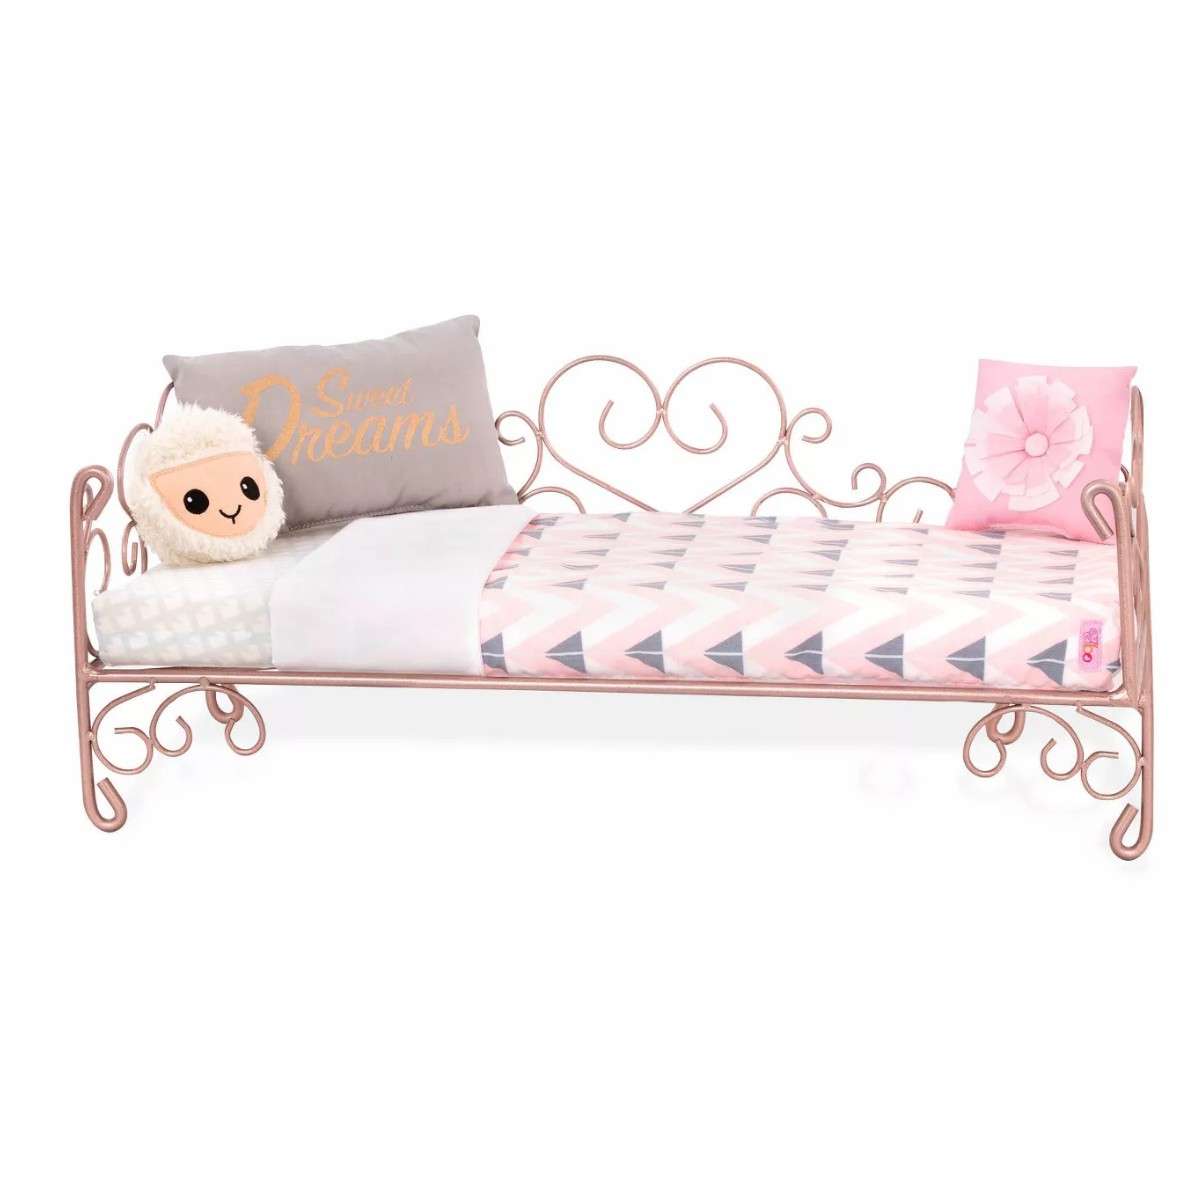 Our Generation - Sweet Dreams Scrollwork Bed (737879)